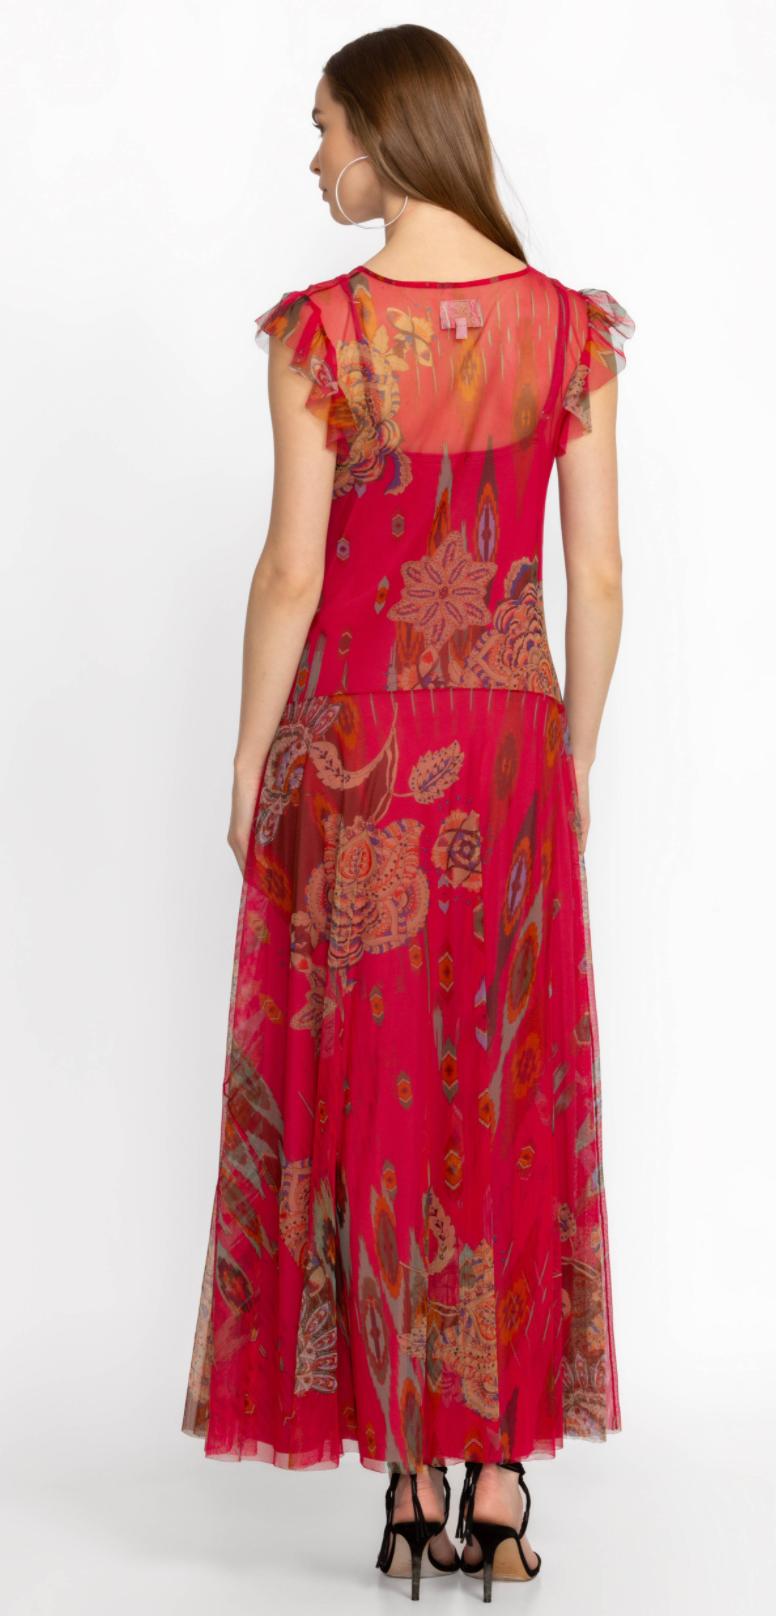 Johnny Was - Feather Mesh Maxi Dress